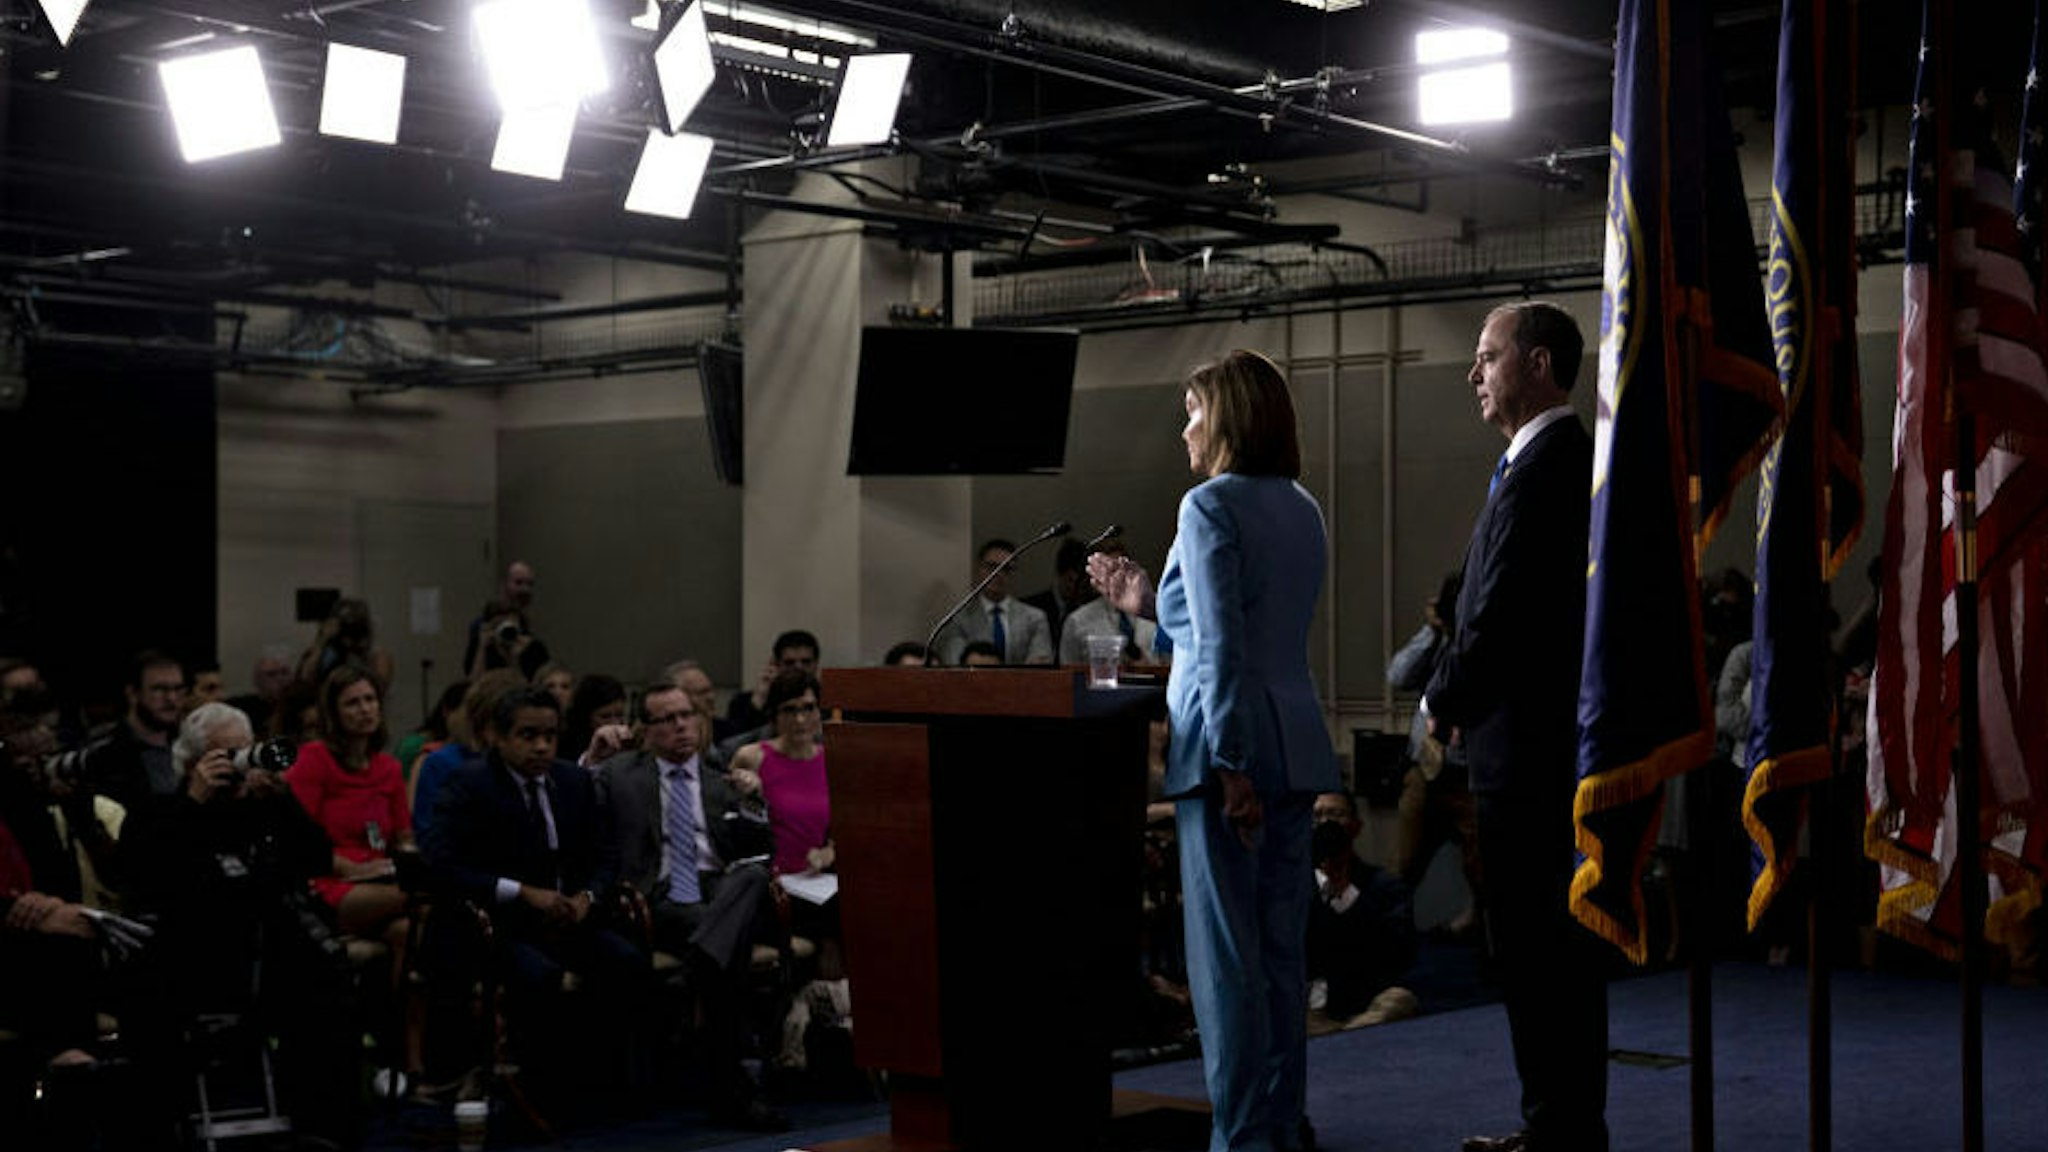 U.S. House Speaker Nancy Pelosi, a Democrat from California, center, speaks as Representative Adam Schiff, a Democrat from California and chairman of the House Intelligence Committee, center right., listens during a news conference on Capitol Hill in Washington, D.C., U.S., on Wednesday, Oct. 2, 2019. Three House committee chairmen threatened on Wednesday to subpoena the White House if it fails to adhere by Friday to document requests related to allegations that President Donald Trump pressured Ukraine into investigating one of his leading political rivals.